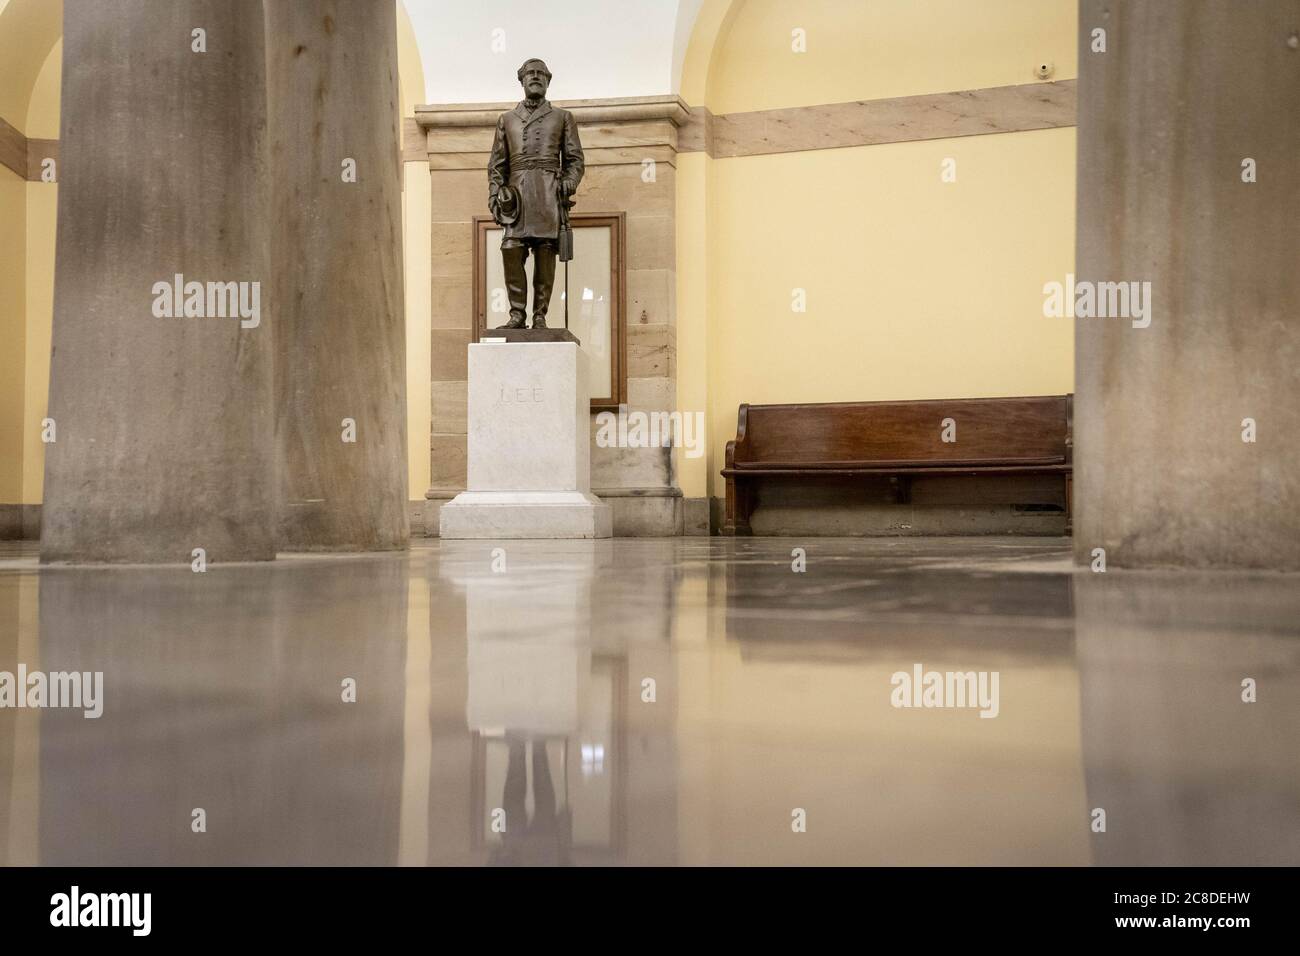 Washington, United States. 23rd July, 2020. A statue of Robert E. Lee, a leader of the Confederate Army of Northern Virginia, stands in the U.S. Capitol in Washington, DC, U.S., on Thursday, July 23, 2020. The House of Representatives voted on Wednesday to remove Confederate statues from the U.S. Capitol as part of an effort to remove symbols of racism. Photo by Sarah Silbiger/UPI Credit: UPI/Alamy Live News Stock Photo